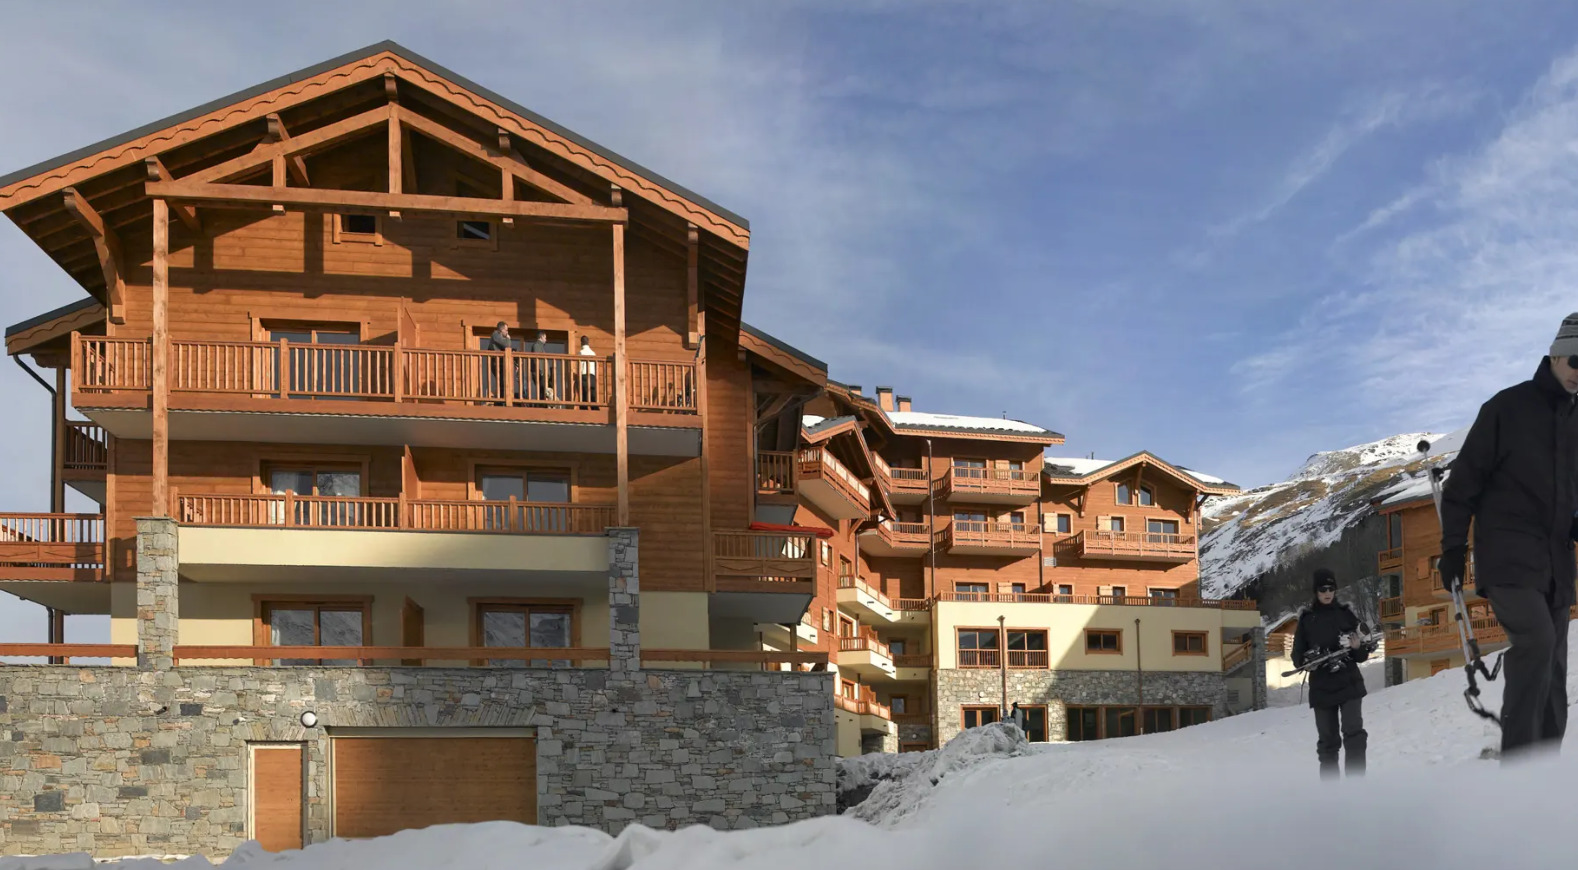 The residence on the slopes